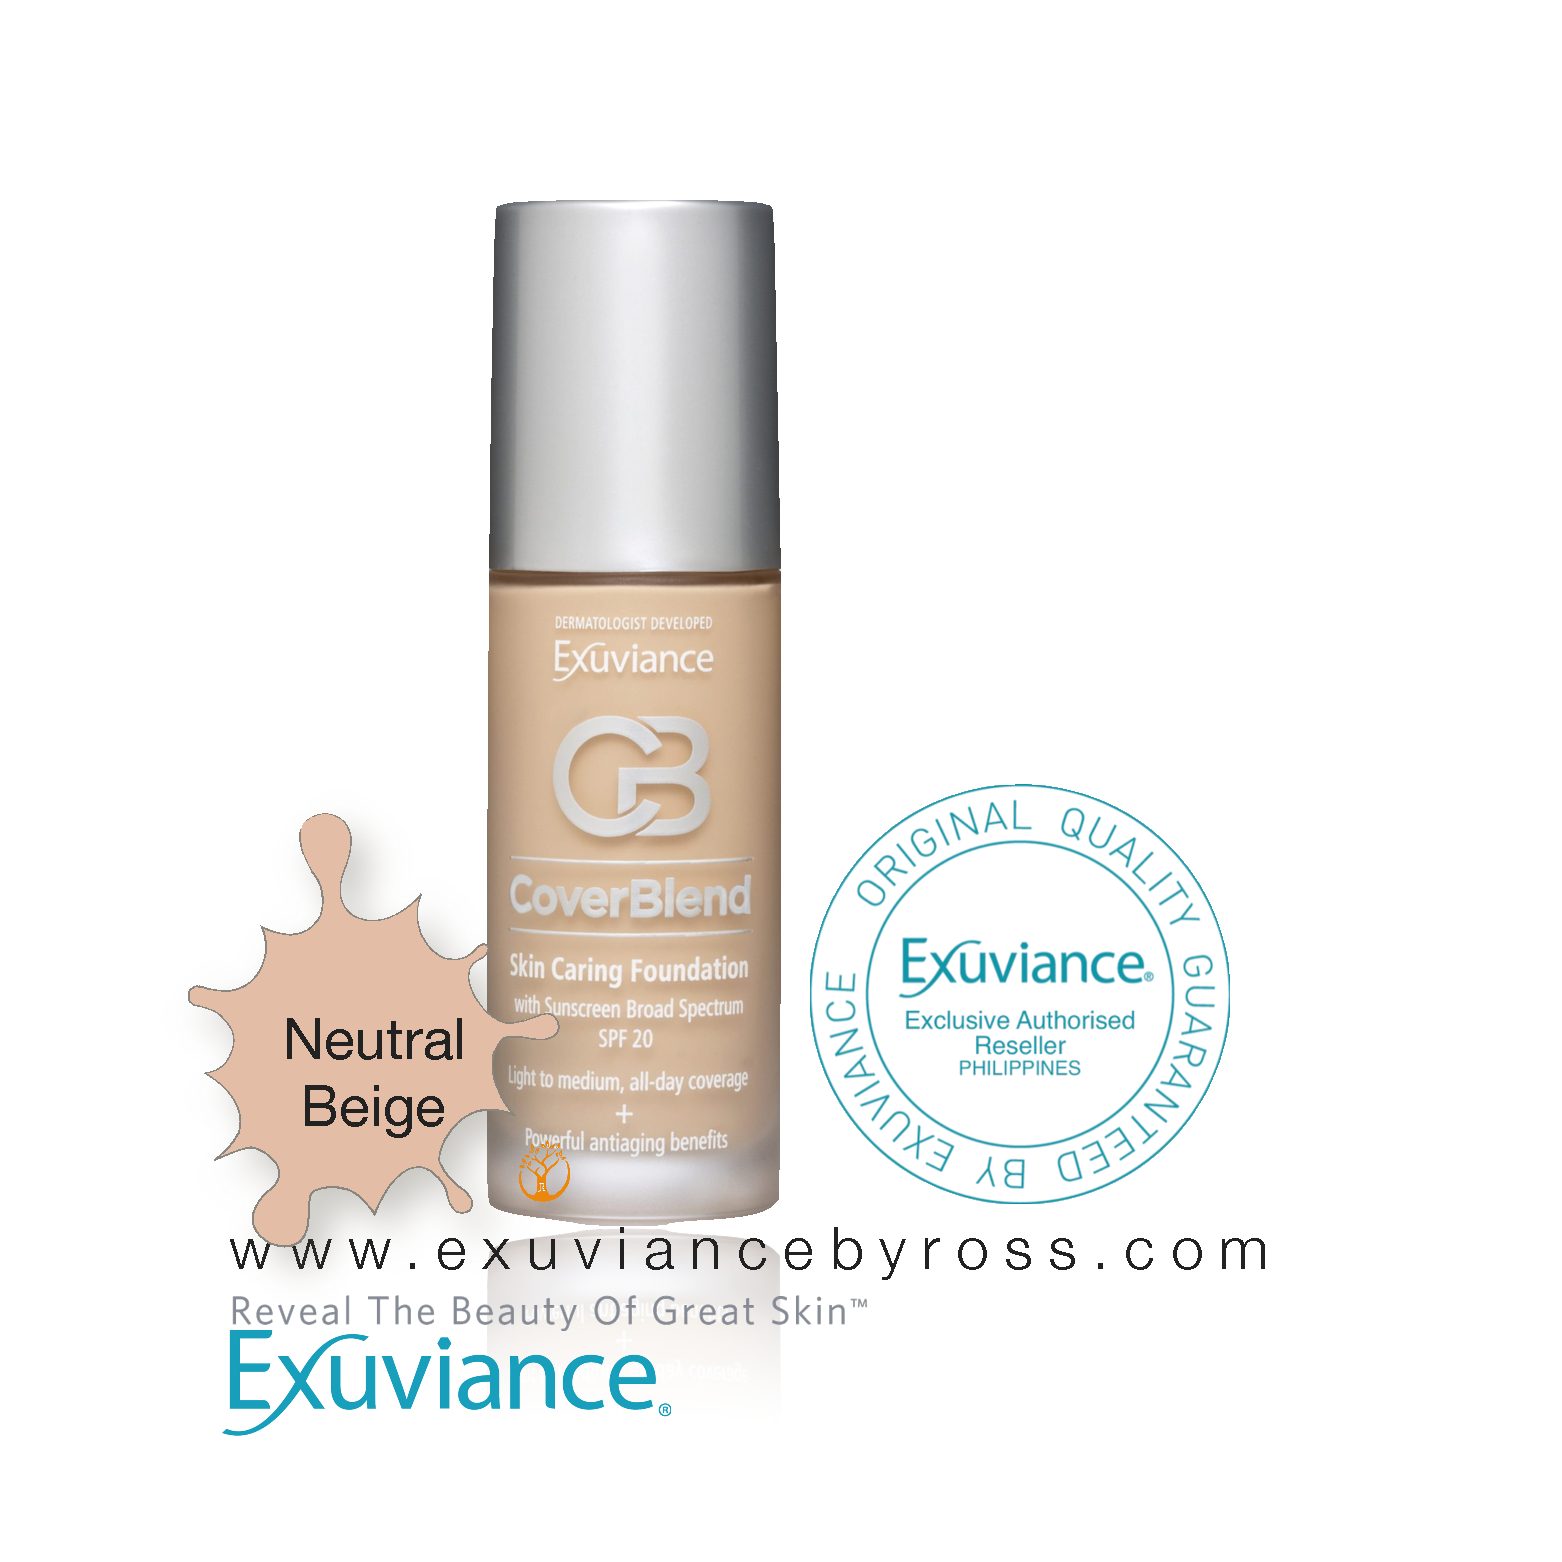 Exuviance CoverBlend Skin Caring Foundation SPF 20 30mL – Neutral